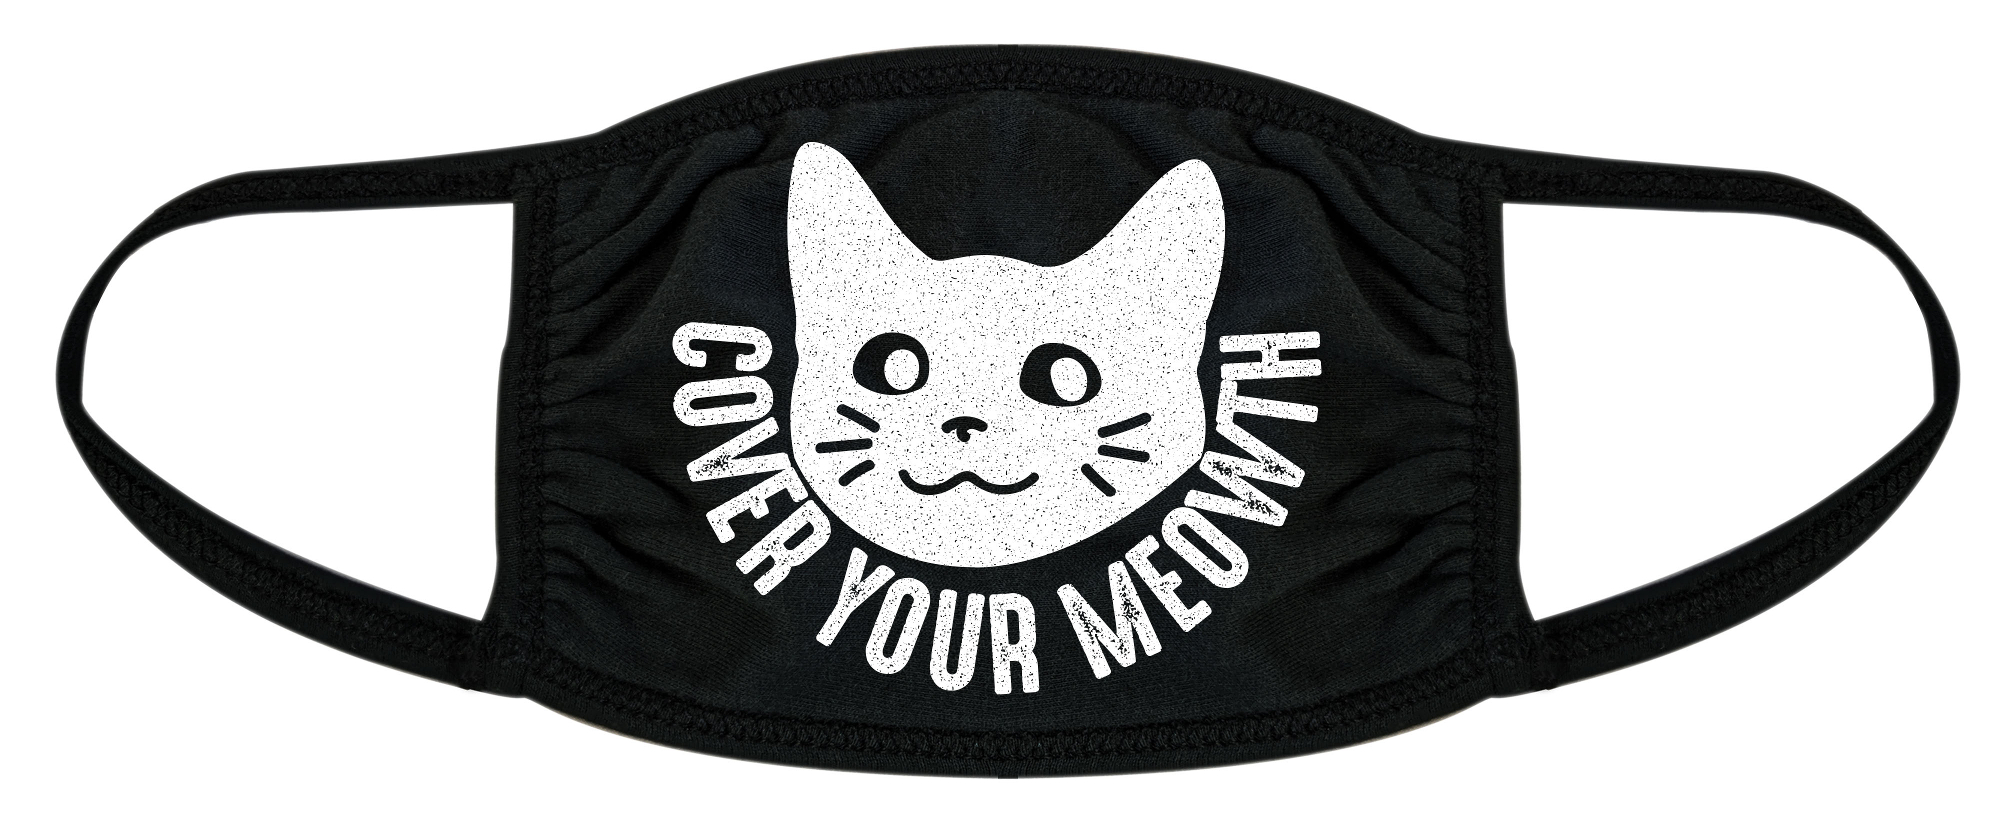 Cover Your Meow Face Mask Funny Crazy Cat Lady Graphic Novelty Nose And Mouth Covering - image 1 of 7